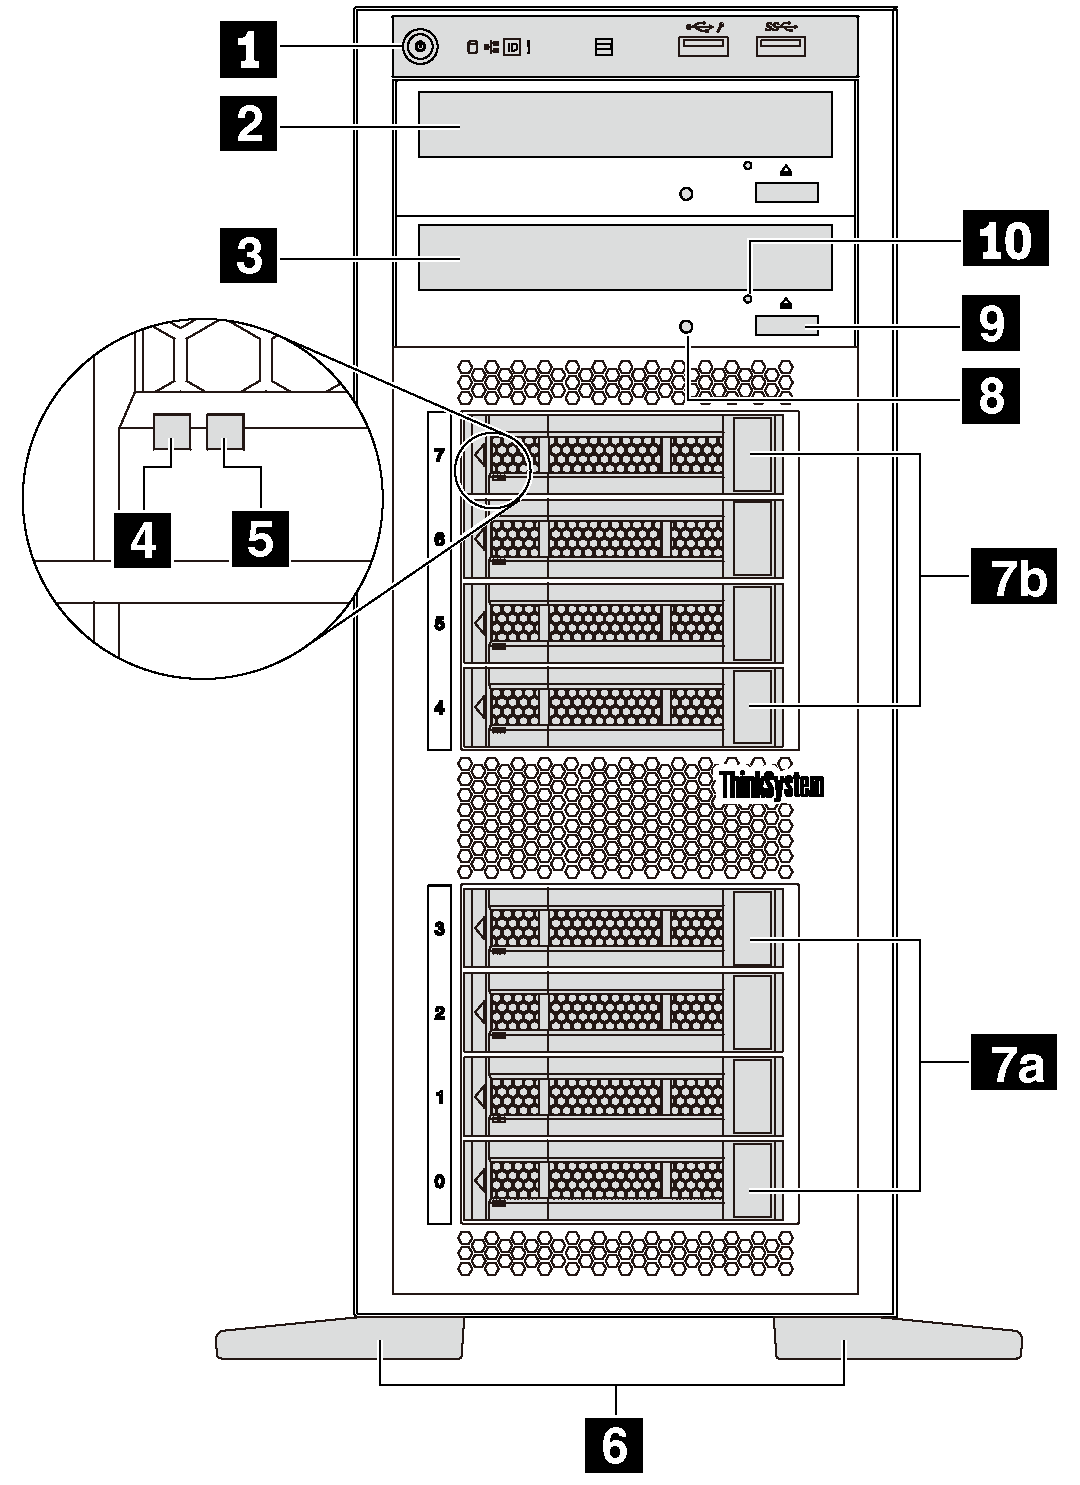 Front view of server models with two optical drive bays and eight 3.5-inch-drive bays